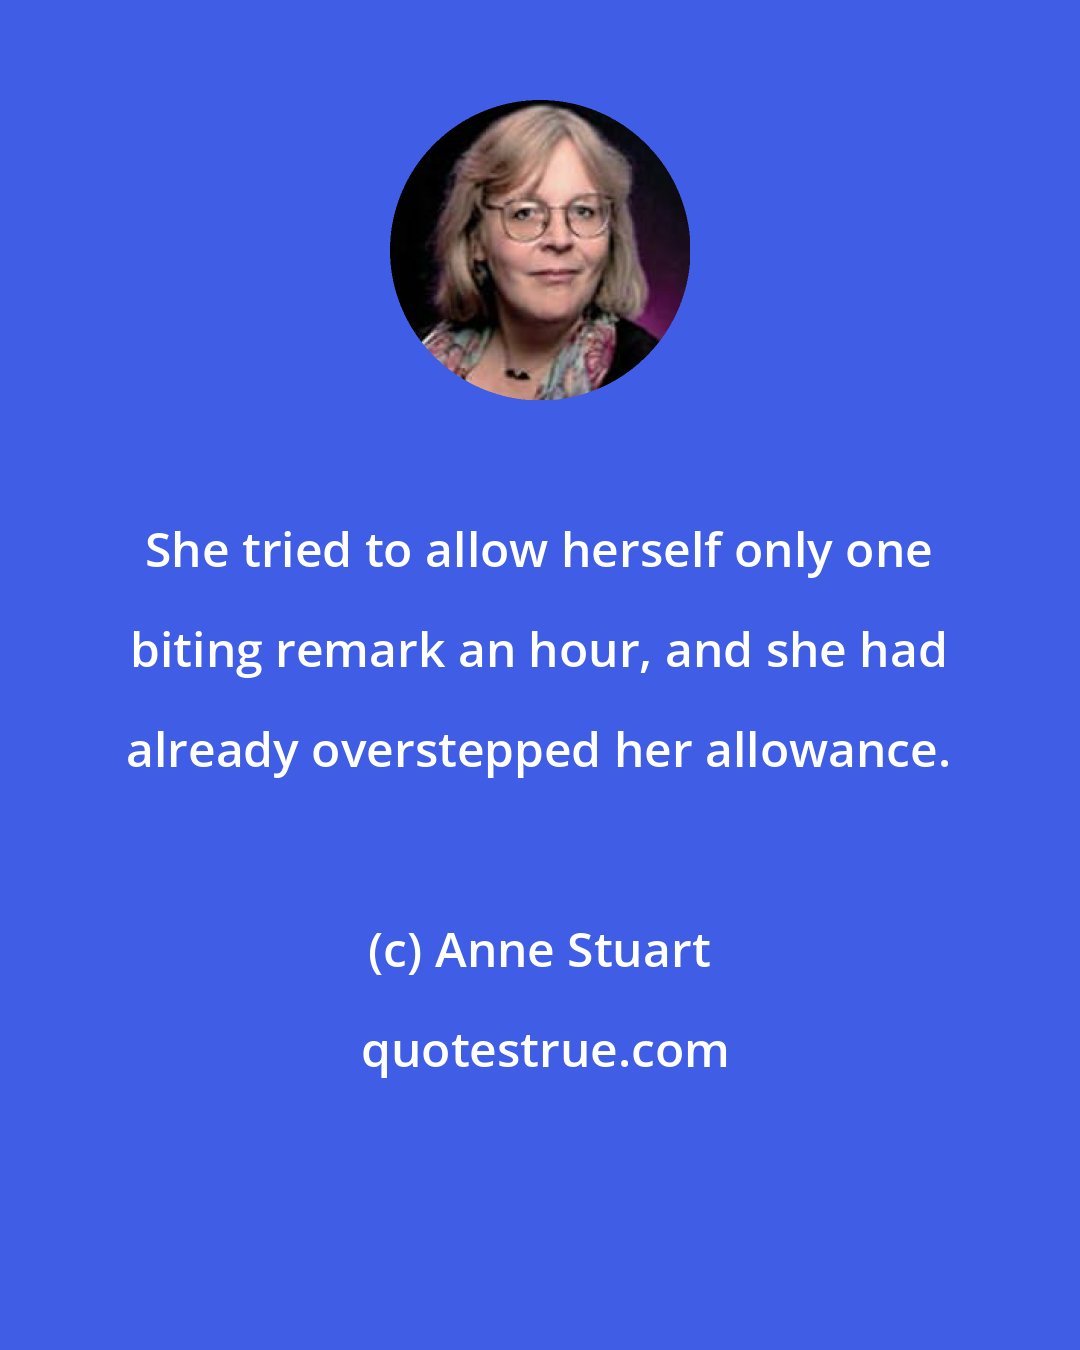 Anne Stuart: She tried to allow herself only one biting remark an hour, and she had already overstepped her allowance.